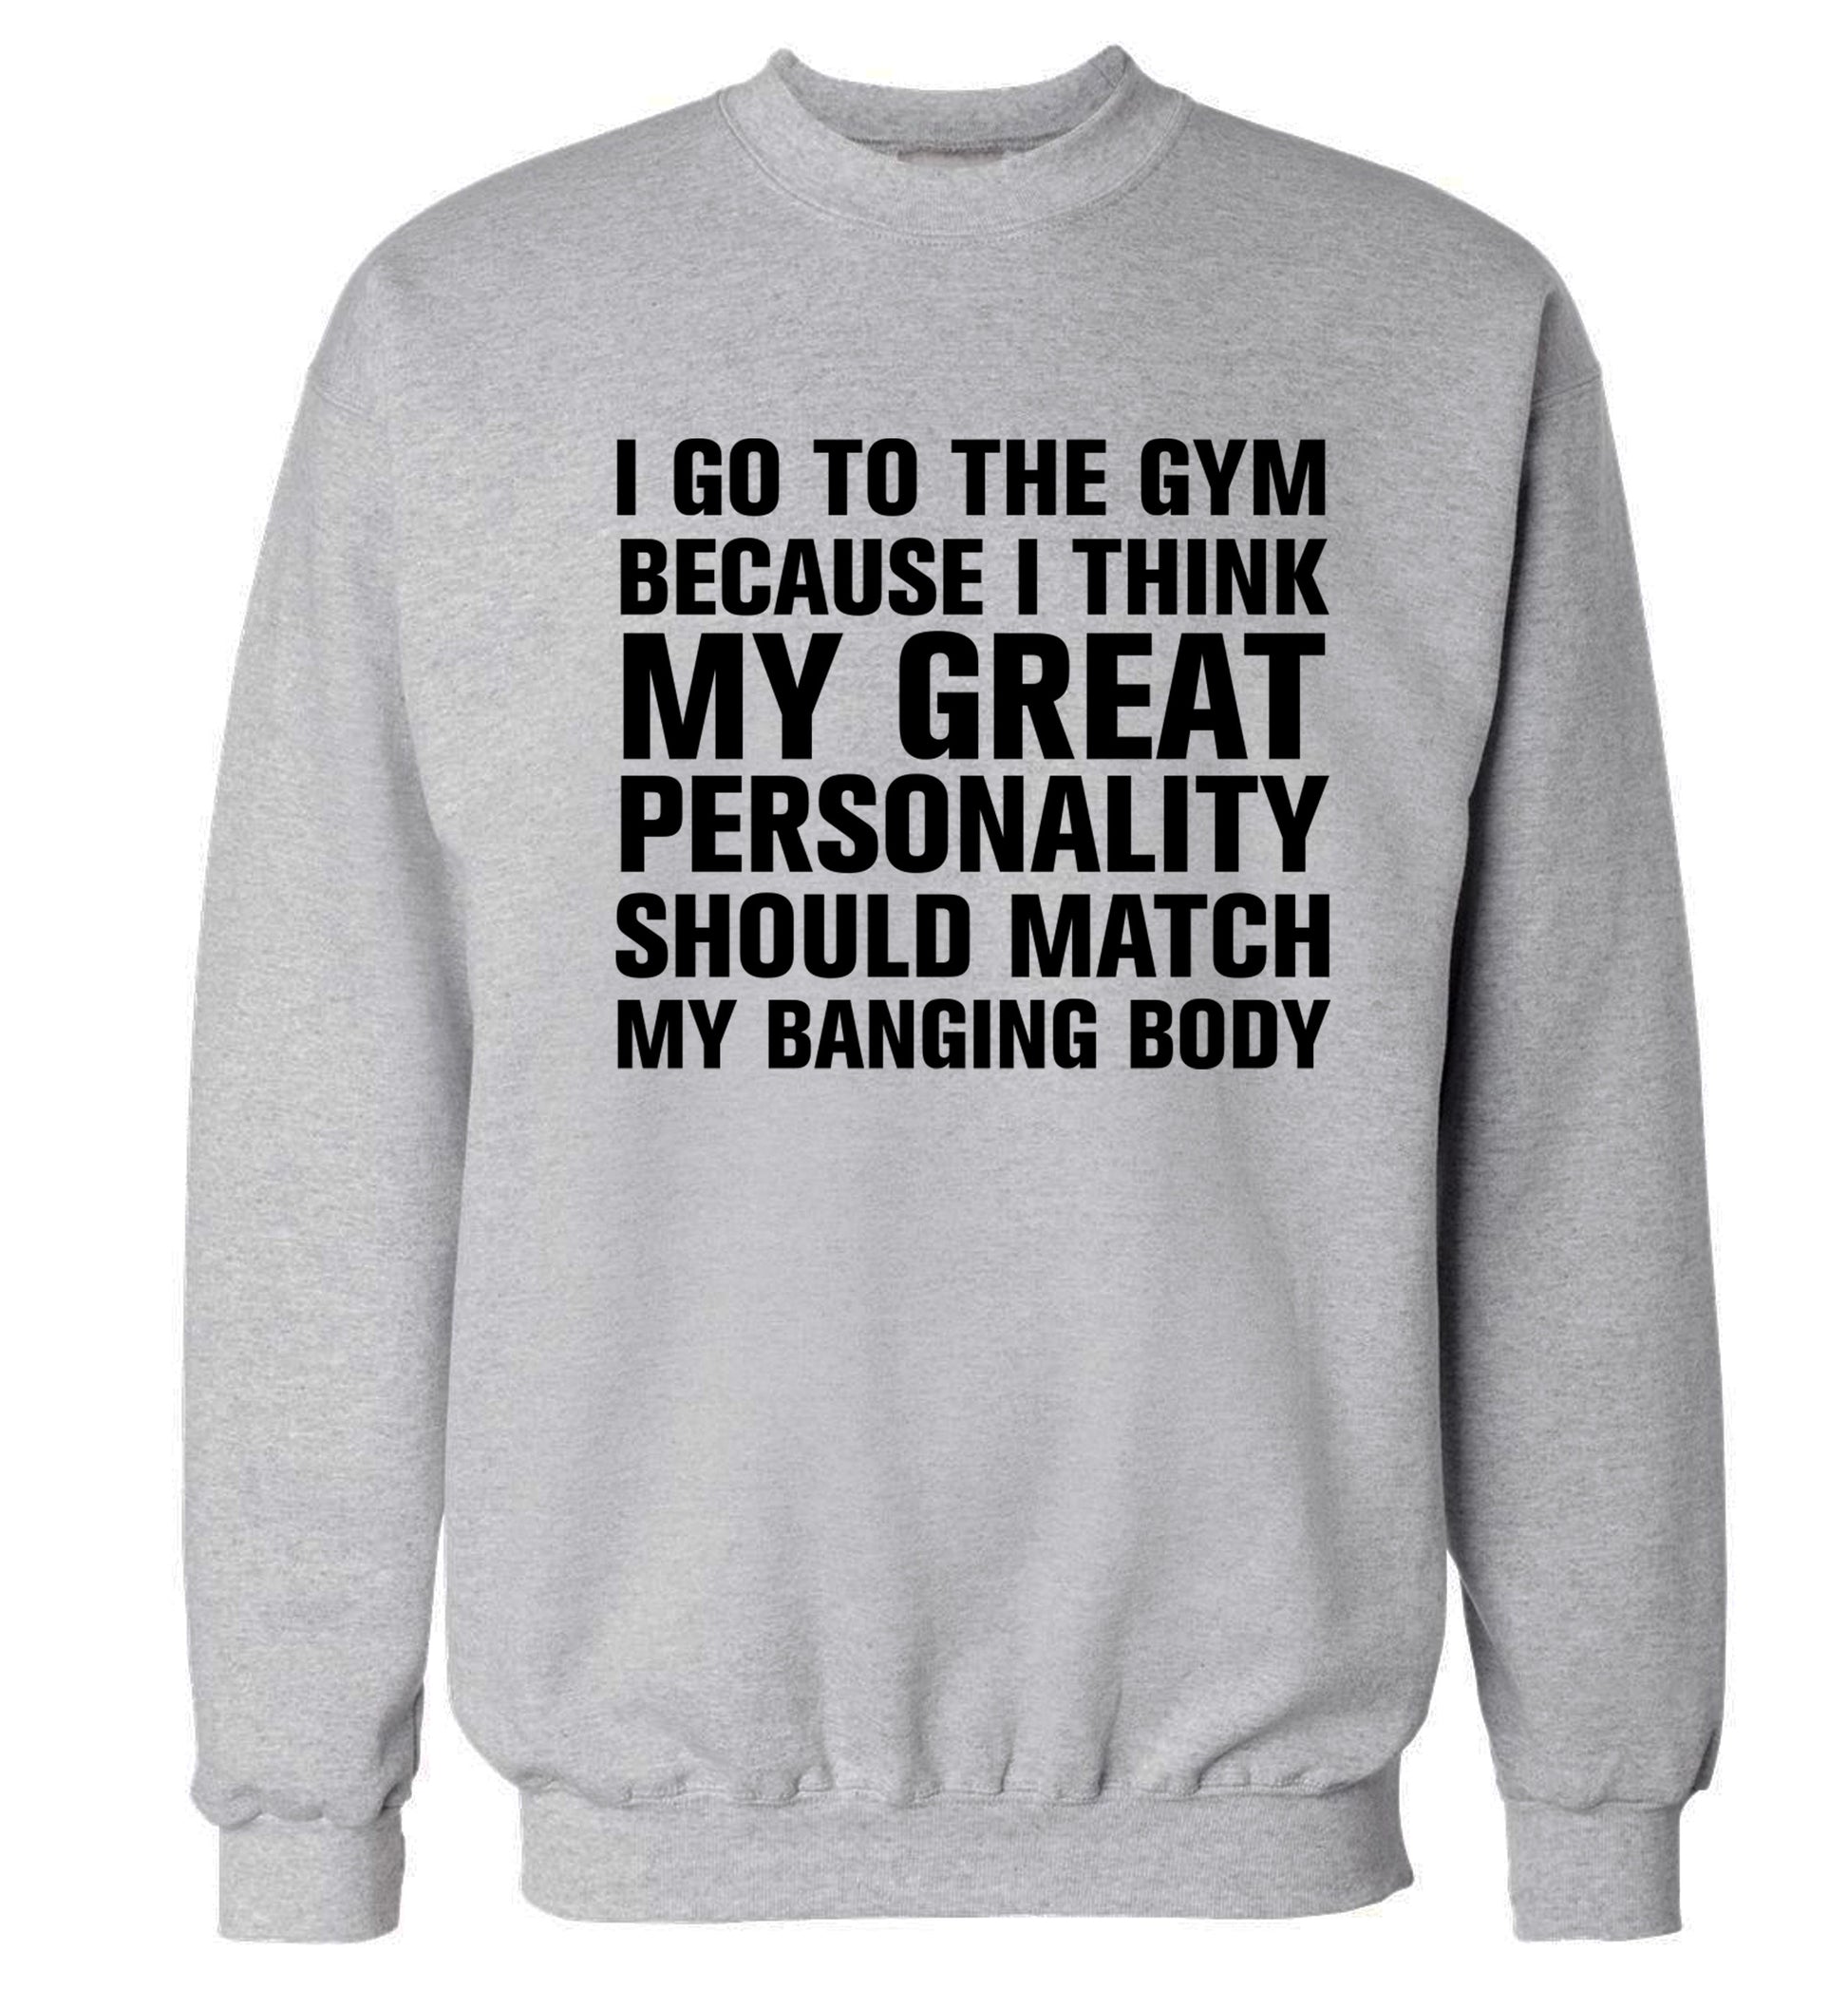 I go to the gym because I think my great personality should match my banging body Adult's unisex grey Sweater 2XL